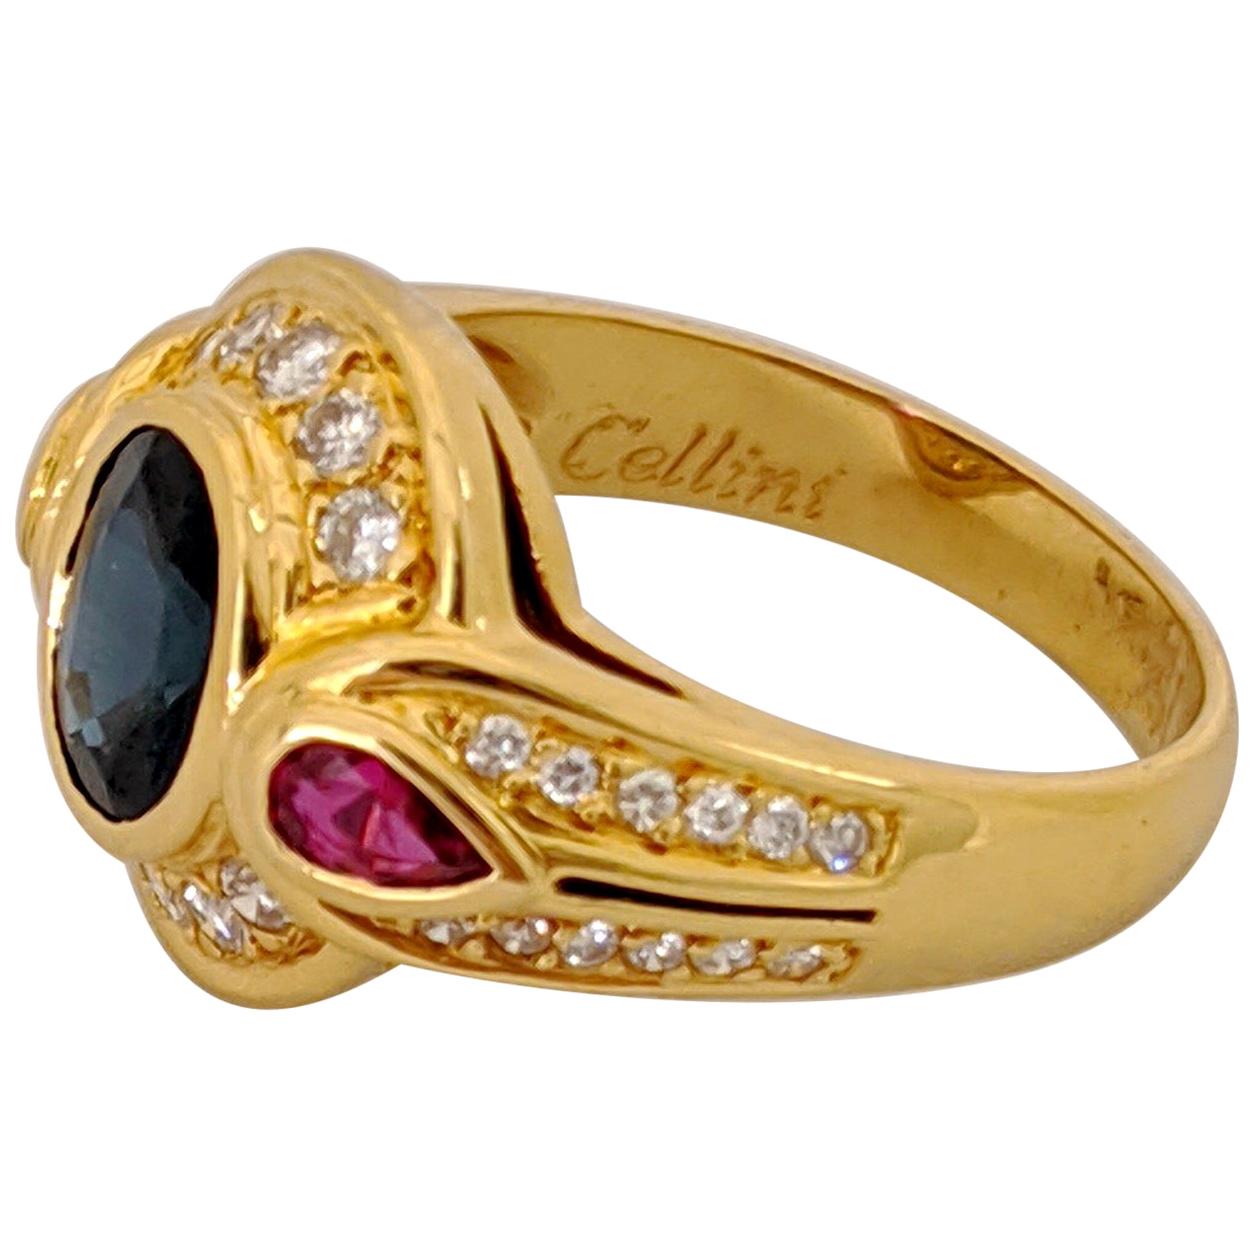 CarreraYCarrera 18kt Gold Ring with 1.65Ct Oval Blue Sapphire, Ruby and Diamonds